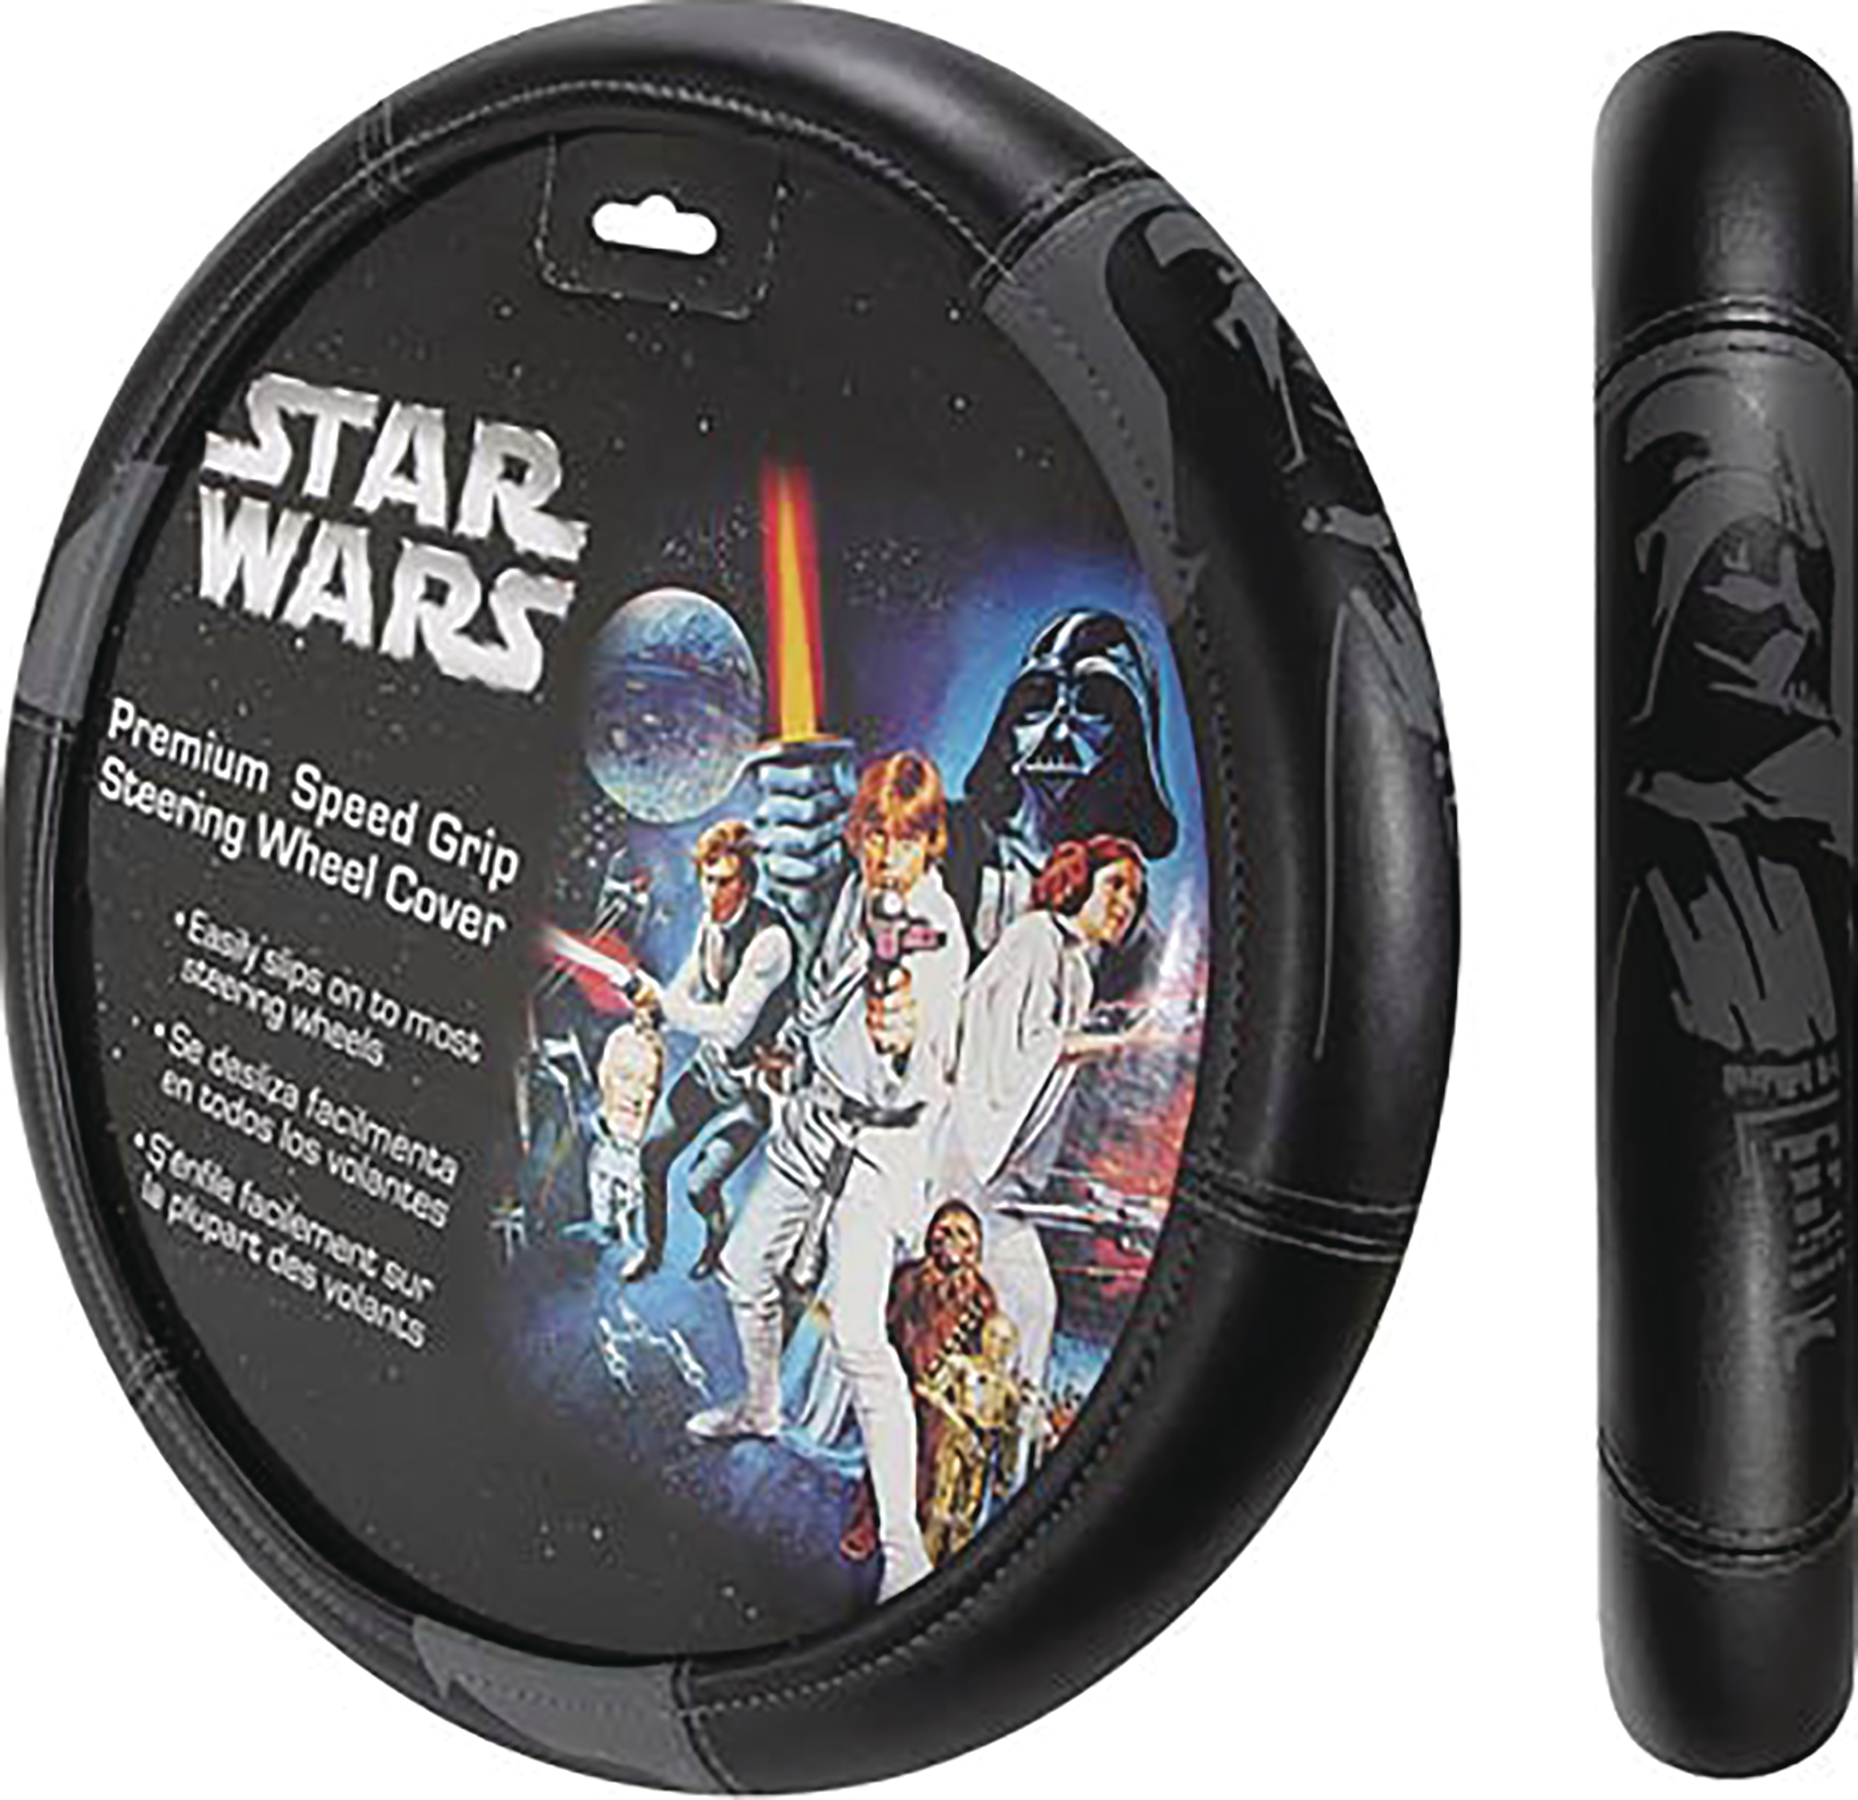 SEP168516 - SW DARTH VADER STEERING WHEEL COVER - Previews World